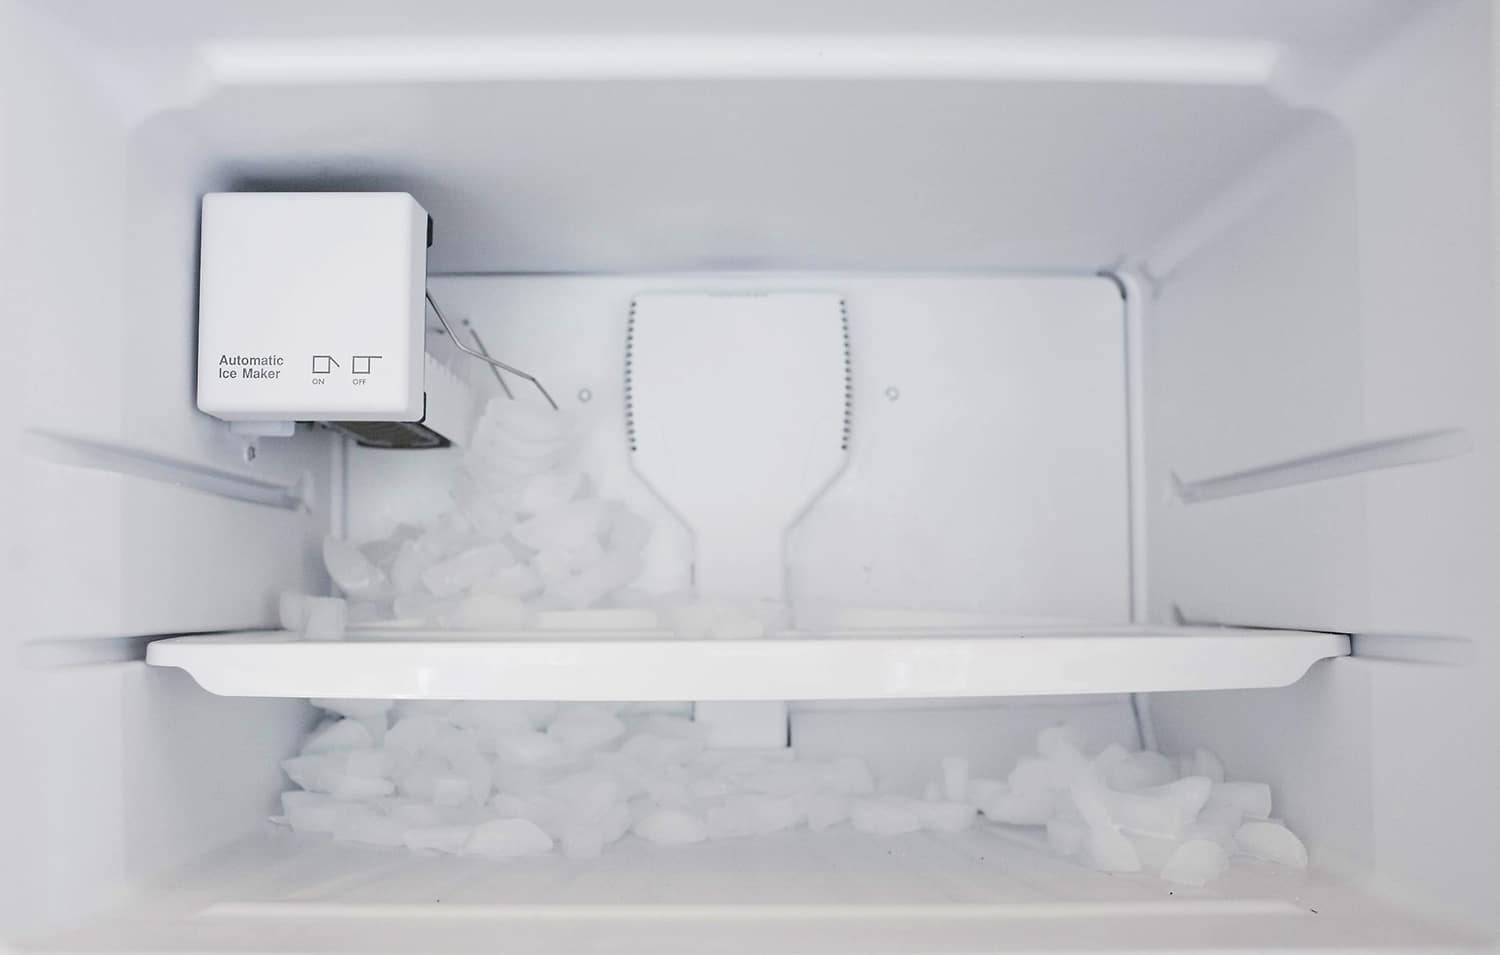 How Do I Reset My Ice Maker? General Tips and Instructions by Brands